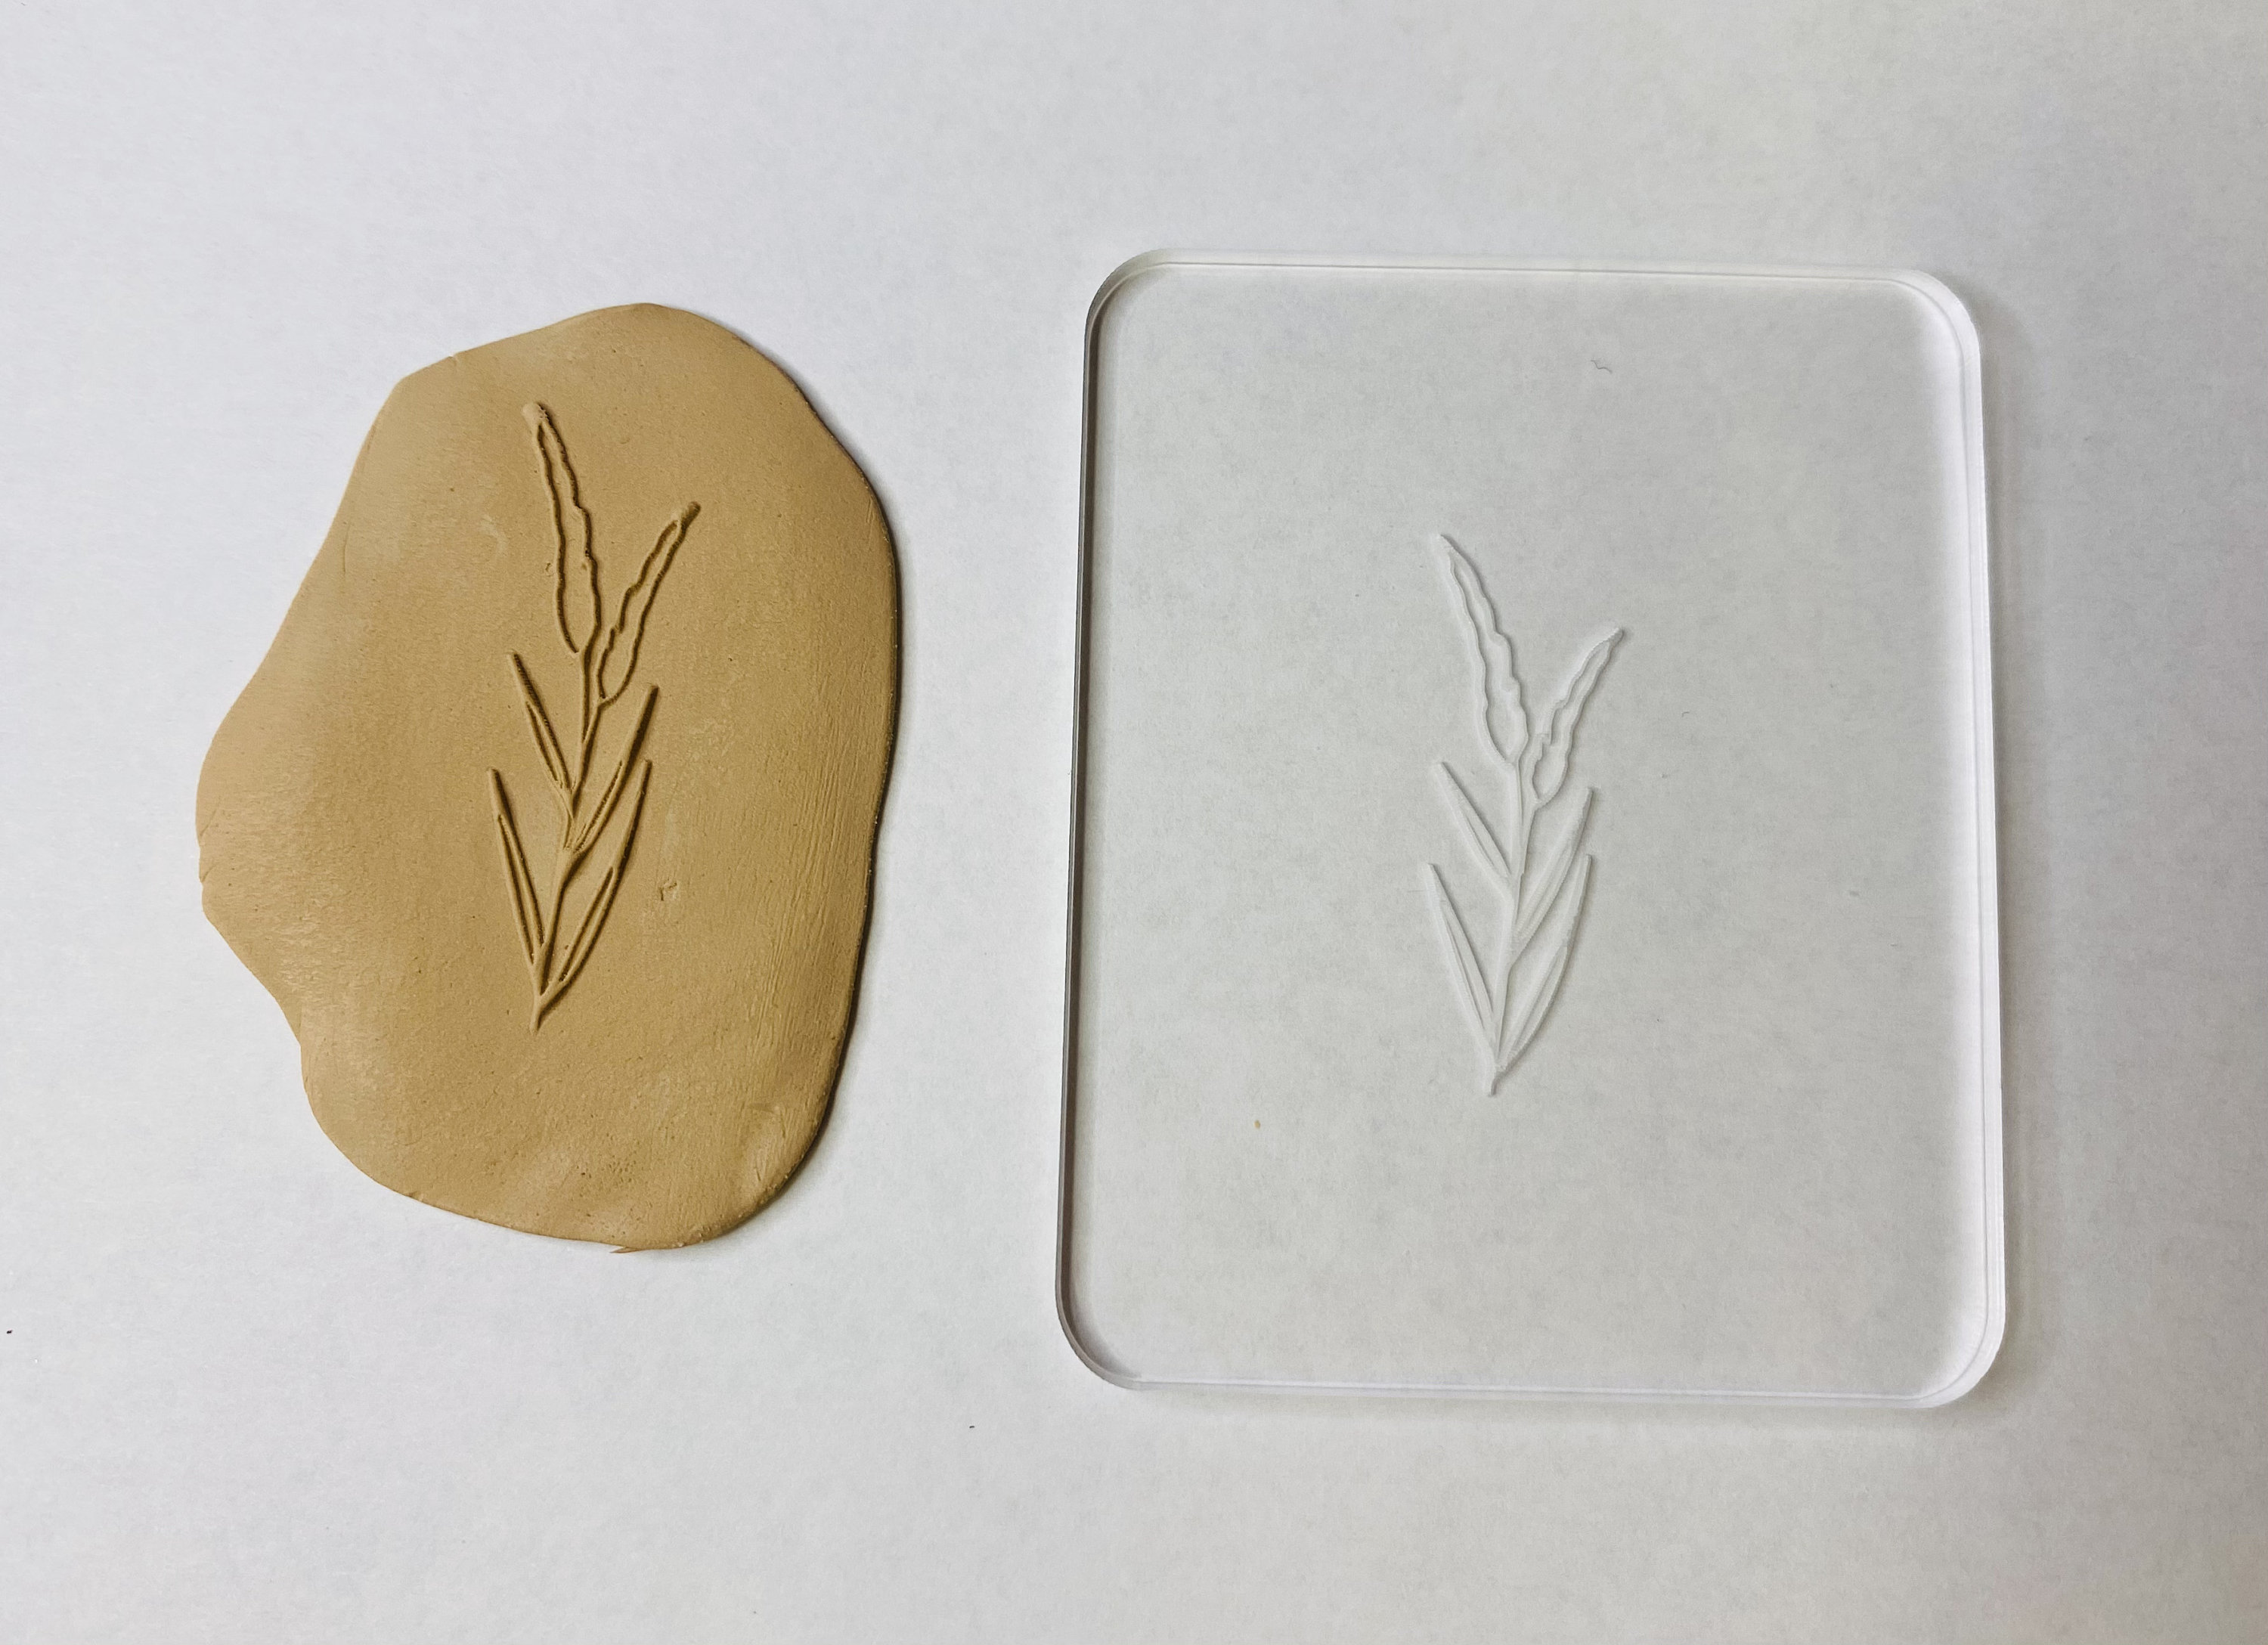 Botanical Polymer Clay Stamps, Leaf Clay Embossing Texture Stamp